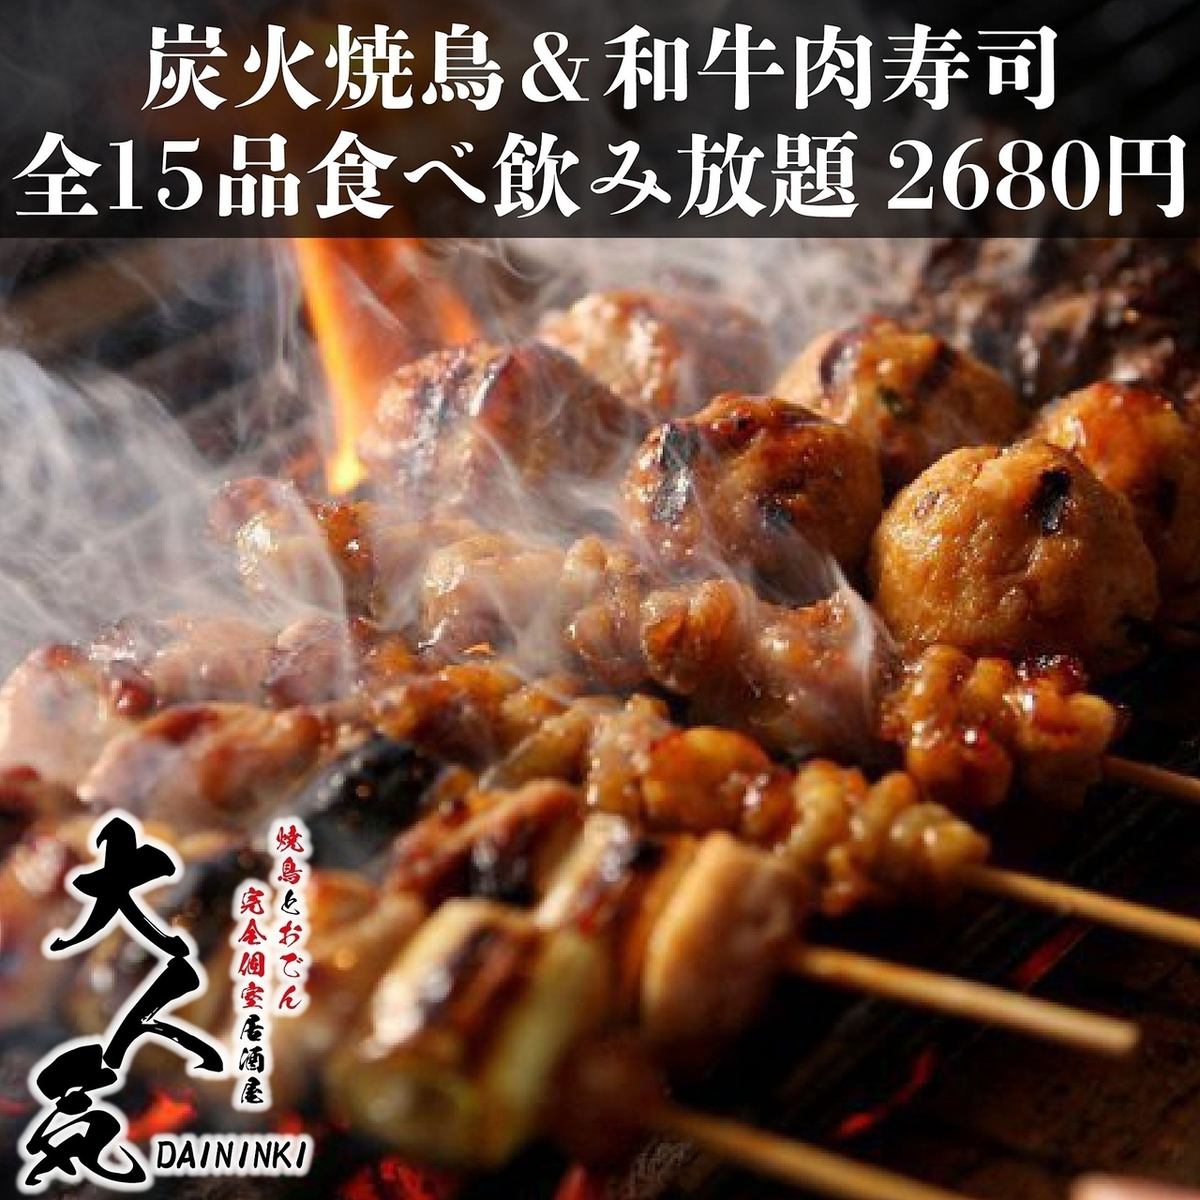 Meat-packing plan popular among women♪ We offer all-you-can-eat meat dishes.